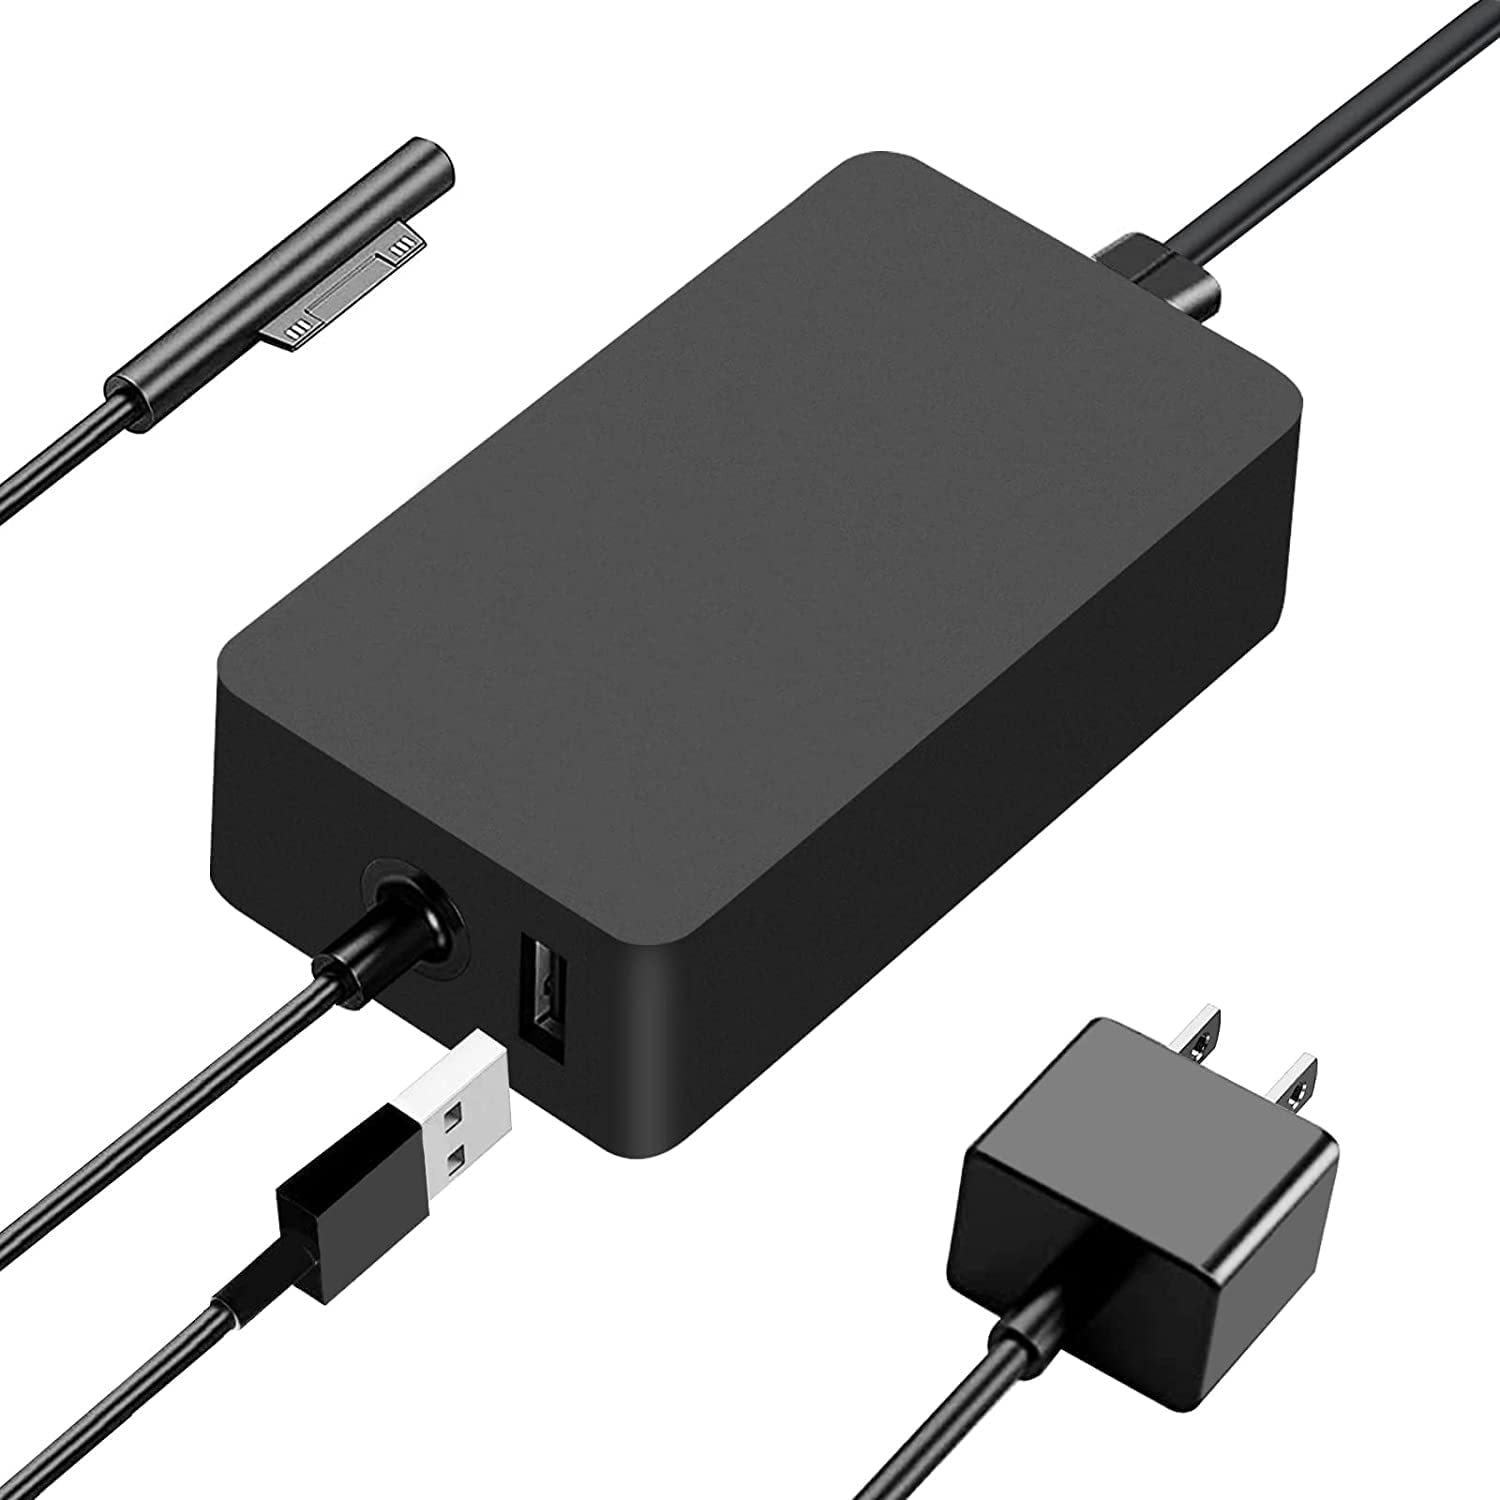 DOLAER 65W Surface Pro Charger for Microsoft Surface Pro 3/4/5/6/7/X, Surface Laptop 1/2/3/4, Surface Go 1/2/3 & Surface Book with 6ft Power Cord